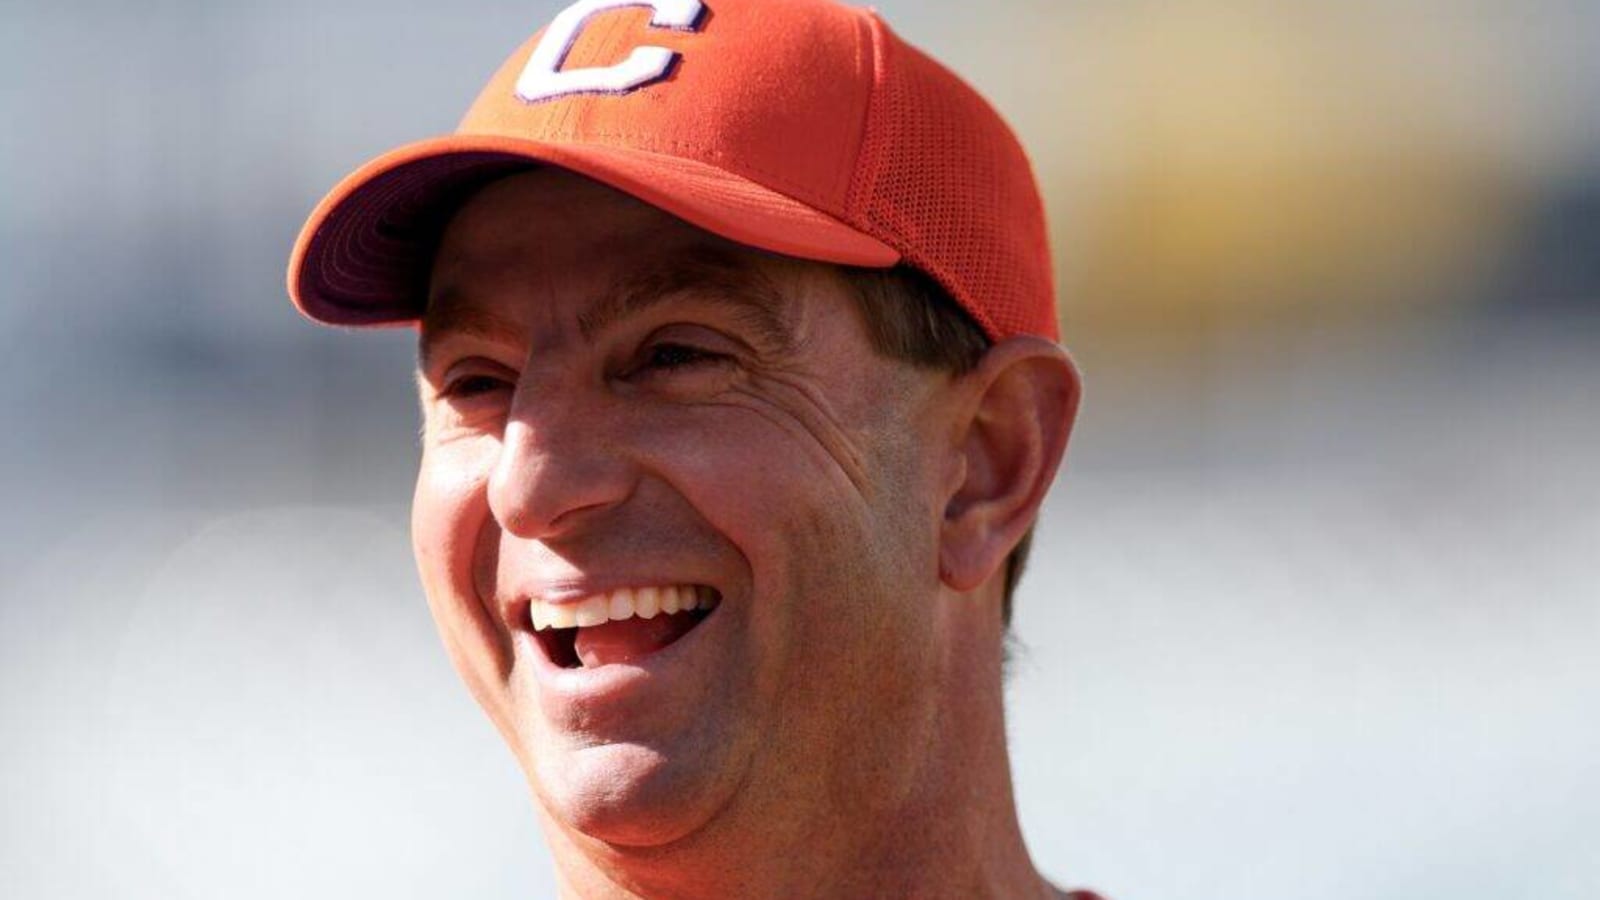 Dabo Swinney speaks his mind on rapidly changing landscape of college football